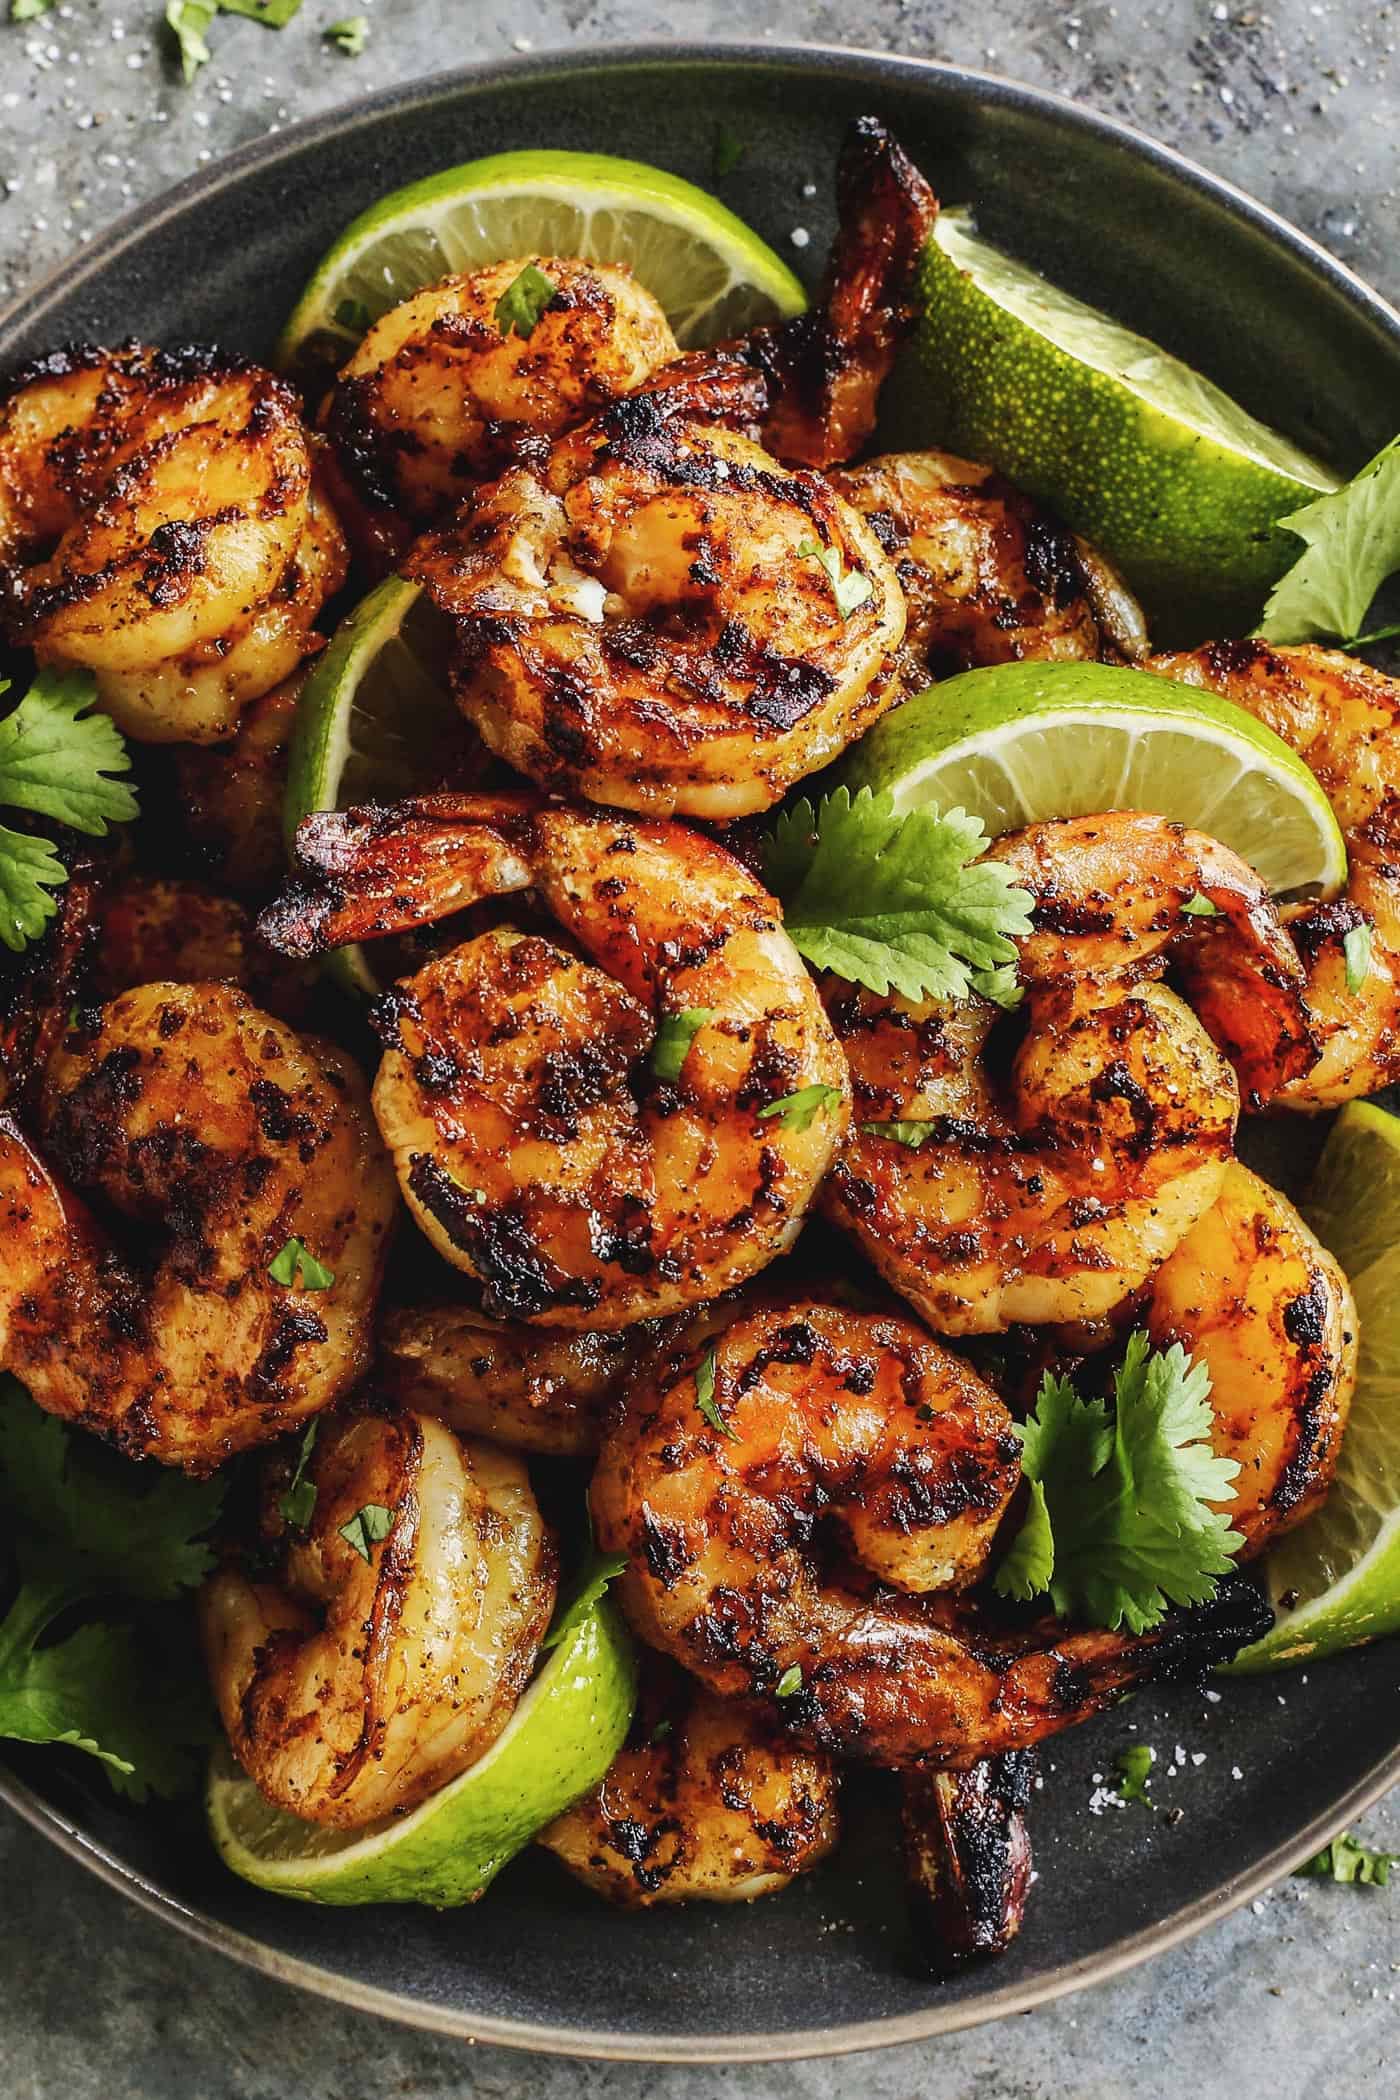 The Best Grilled Shrimp Cocktail Recipe l A Farmgirl's Dabbles